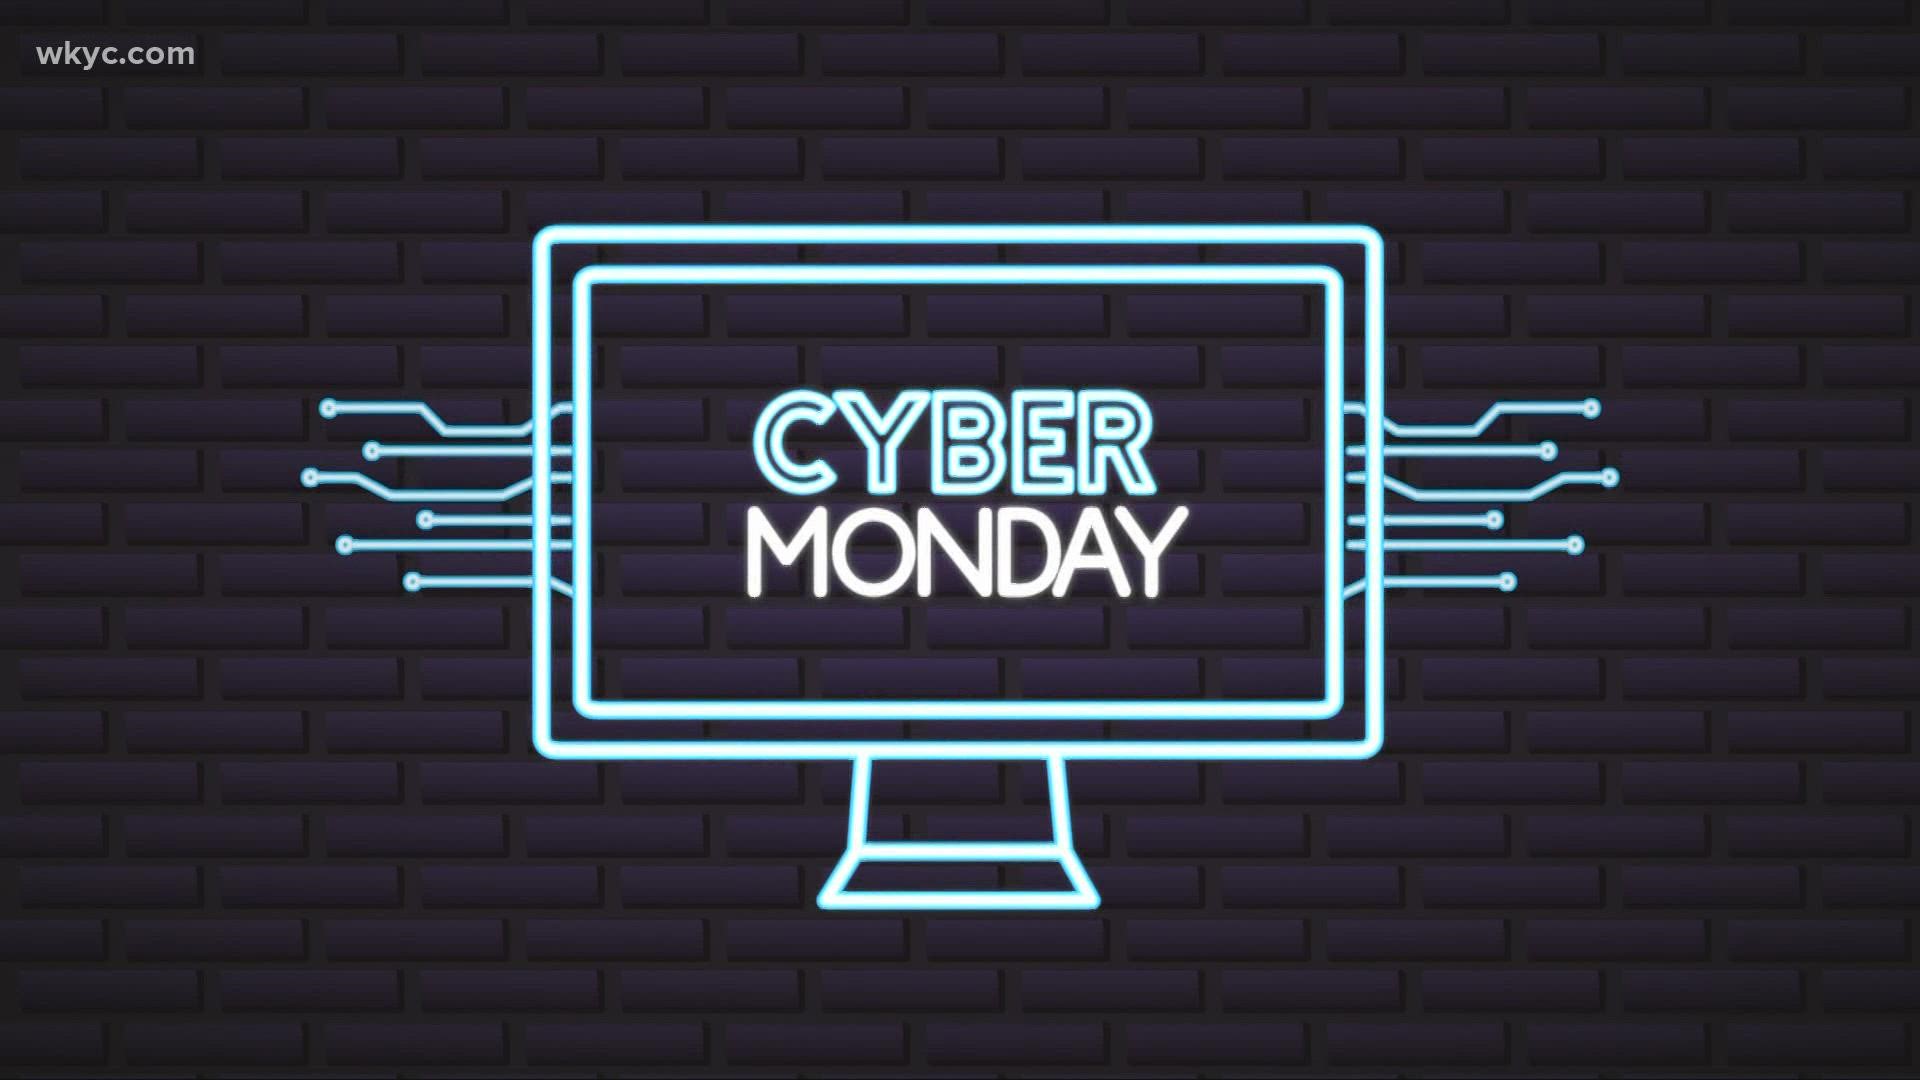 Adobe predicts as much as $11.3 billion could be spent this Cyber Monday, which would surpass Black Friday's underwhelming $8.9 billion final total.